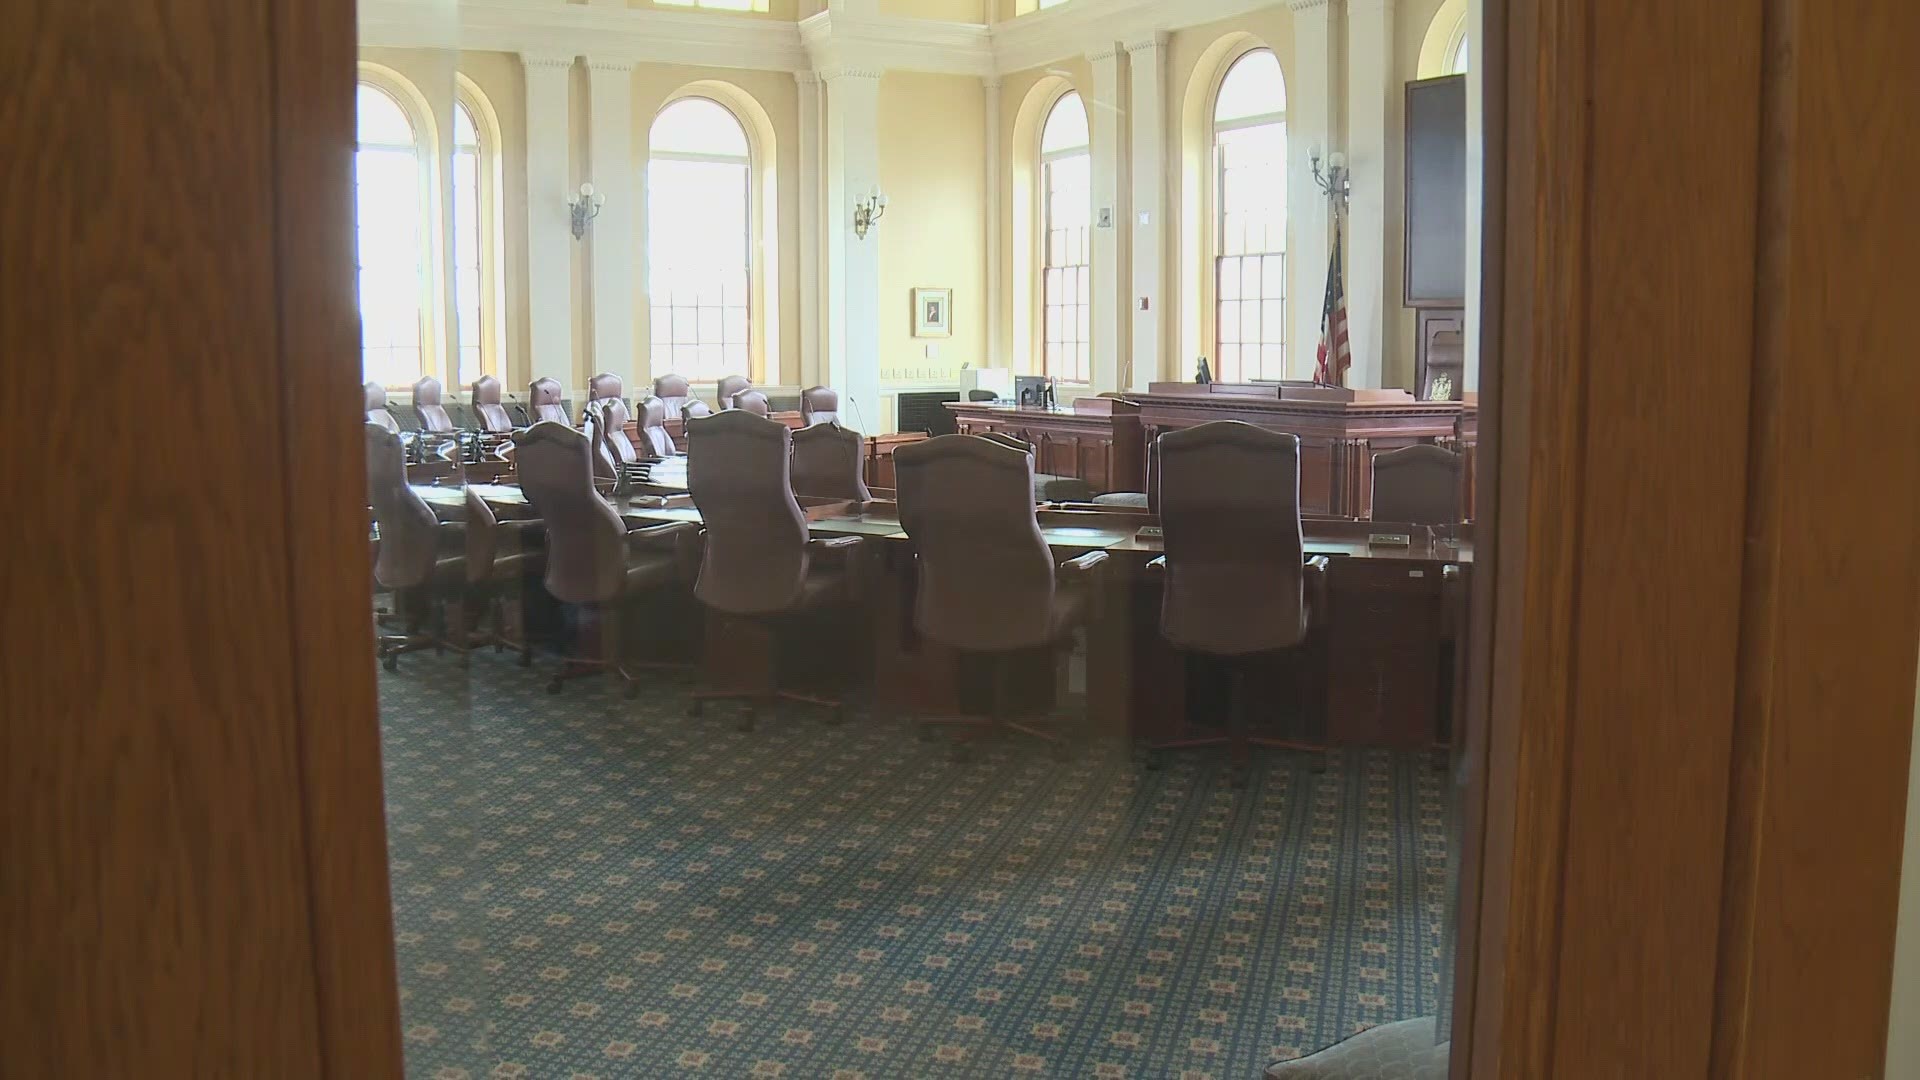 Maine legislators are counting the change after this year's pandemic to see what needs fixing before next year's budget is approved.